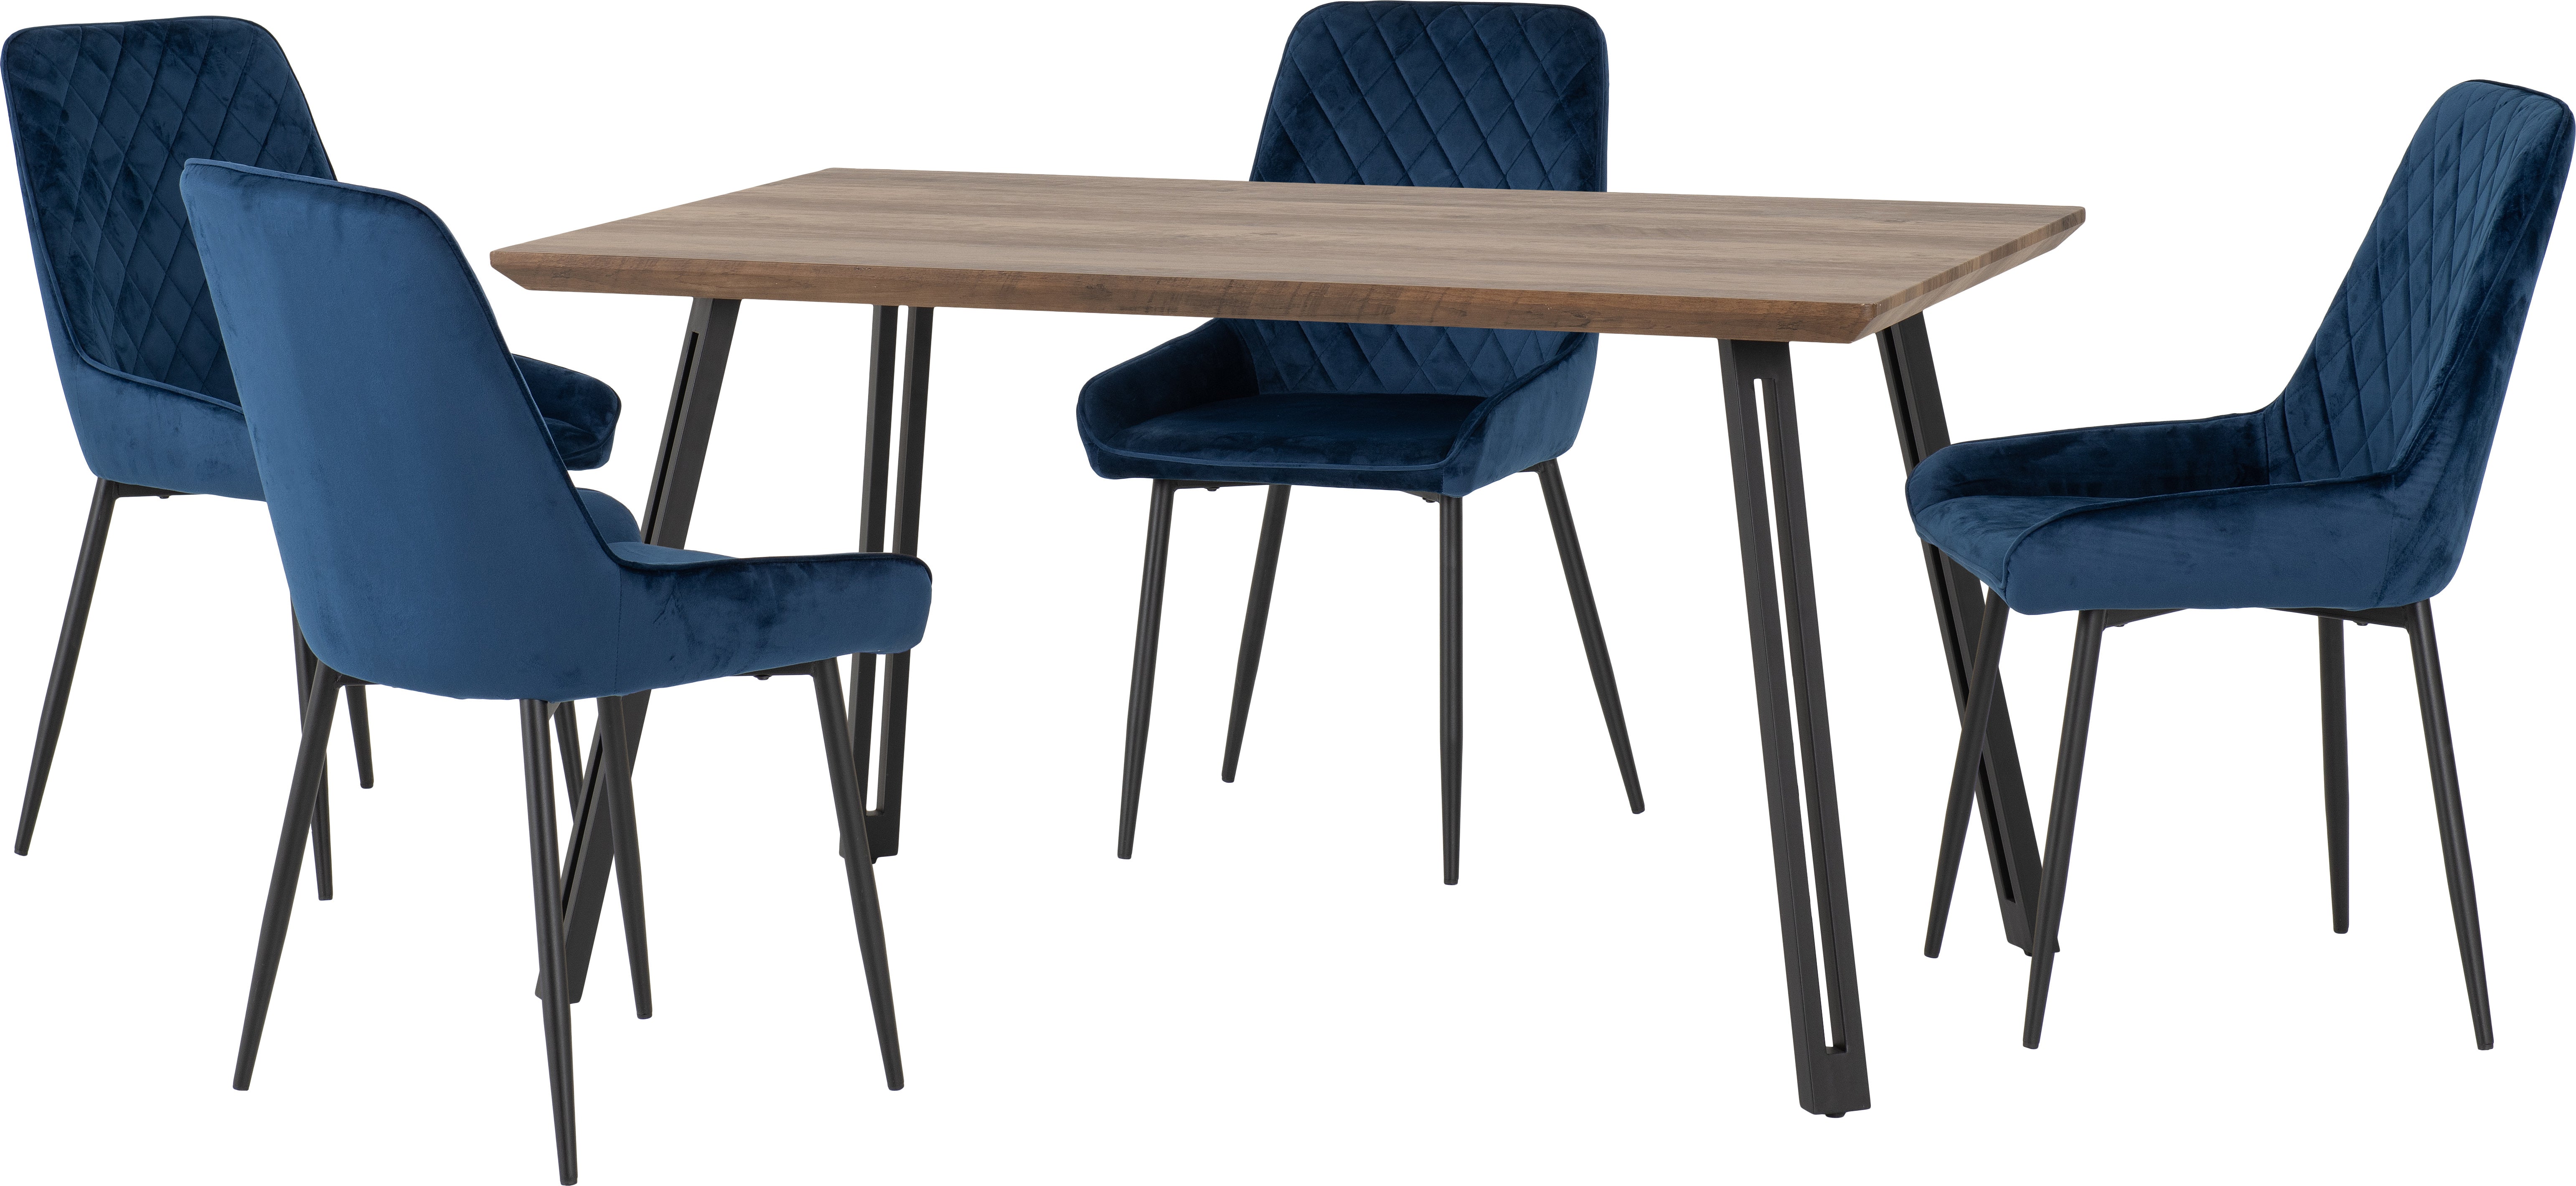 Quebec Straight Edge Dining Set with Avery Chairs